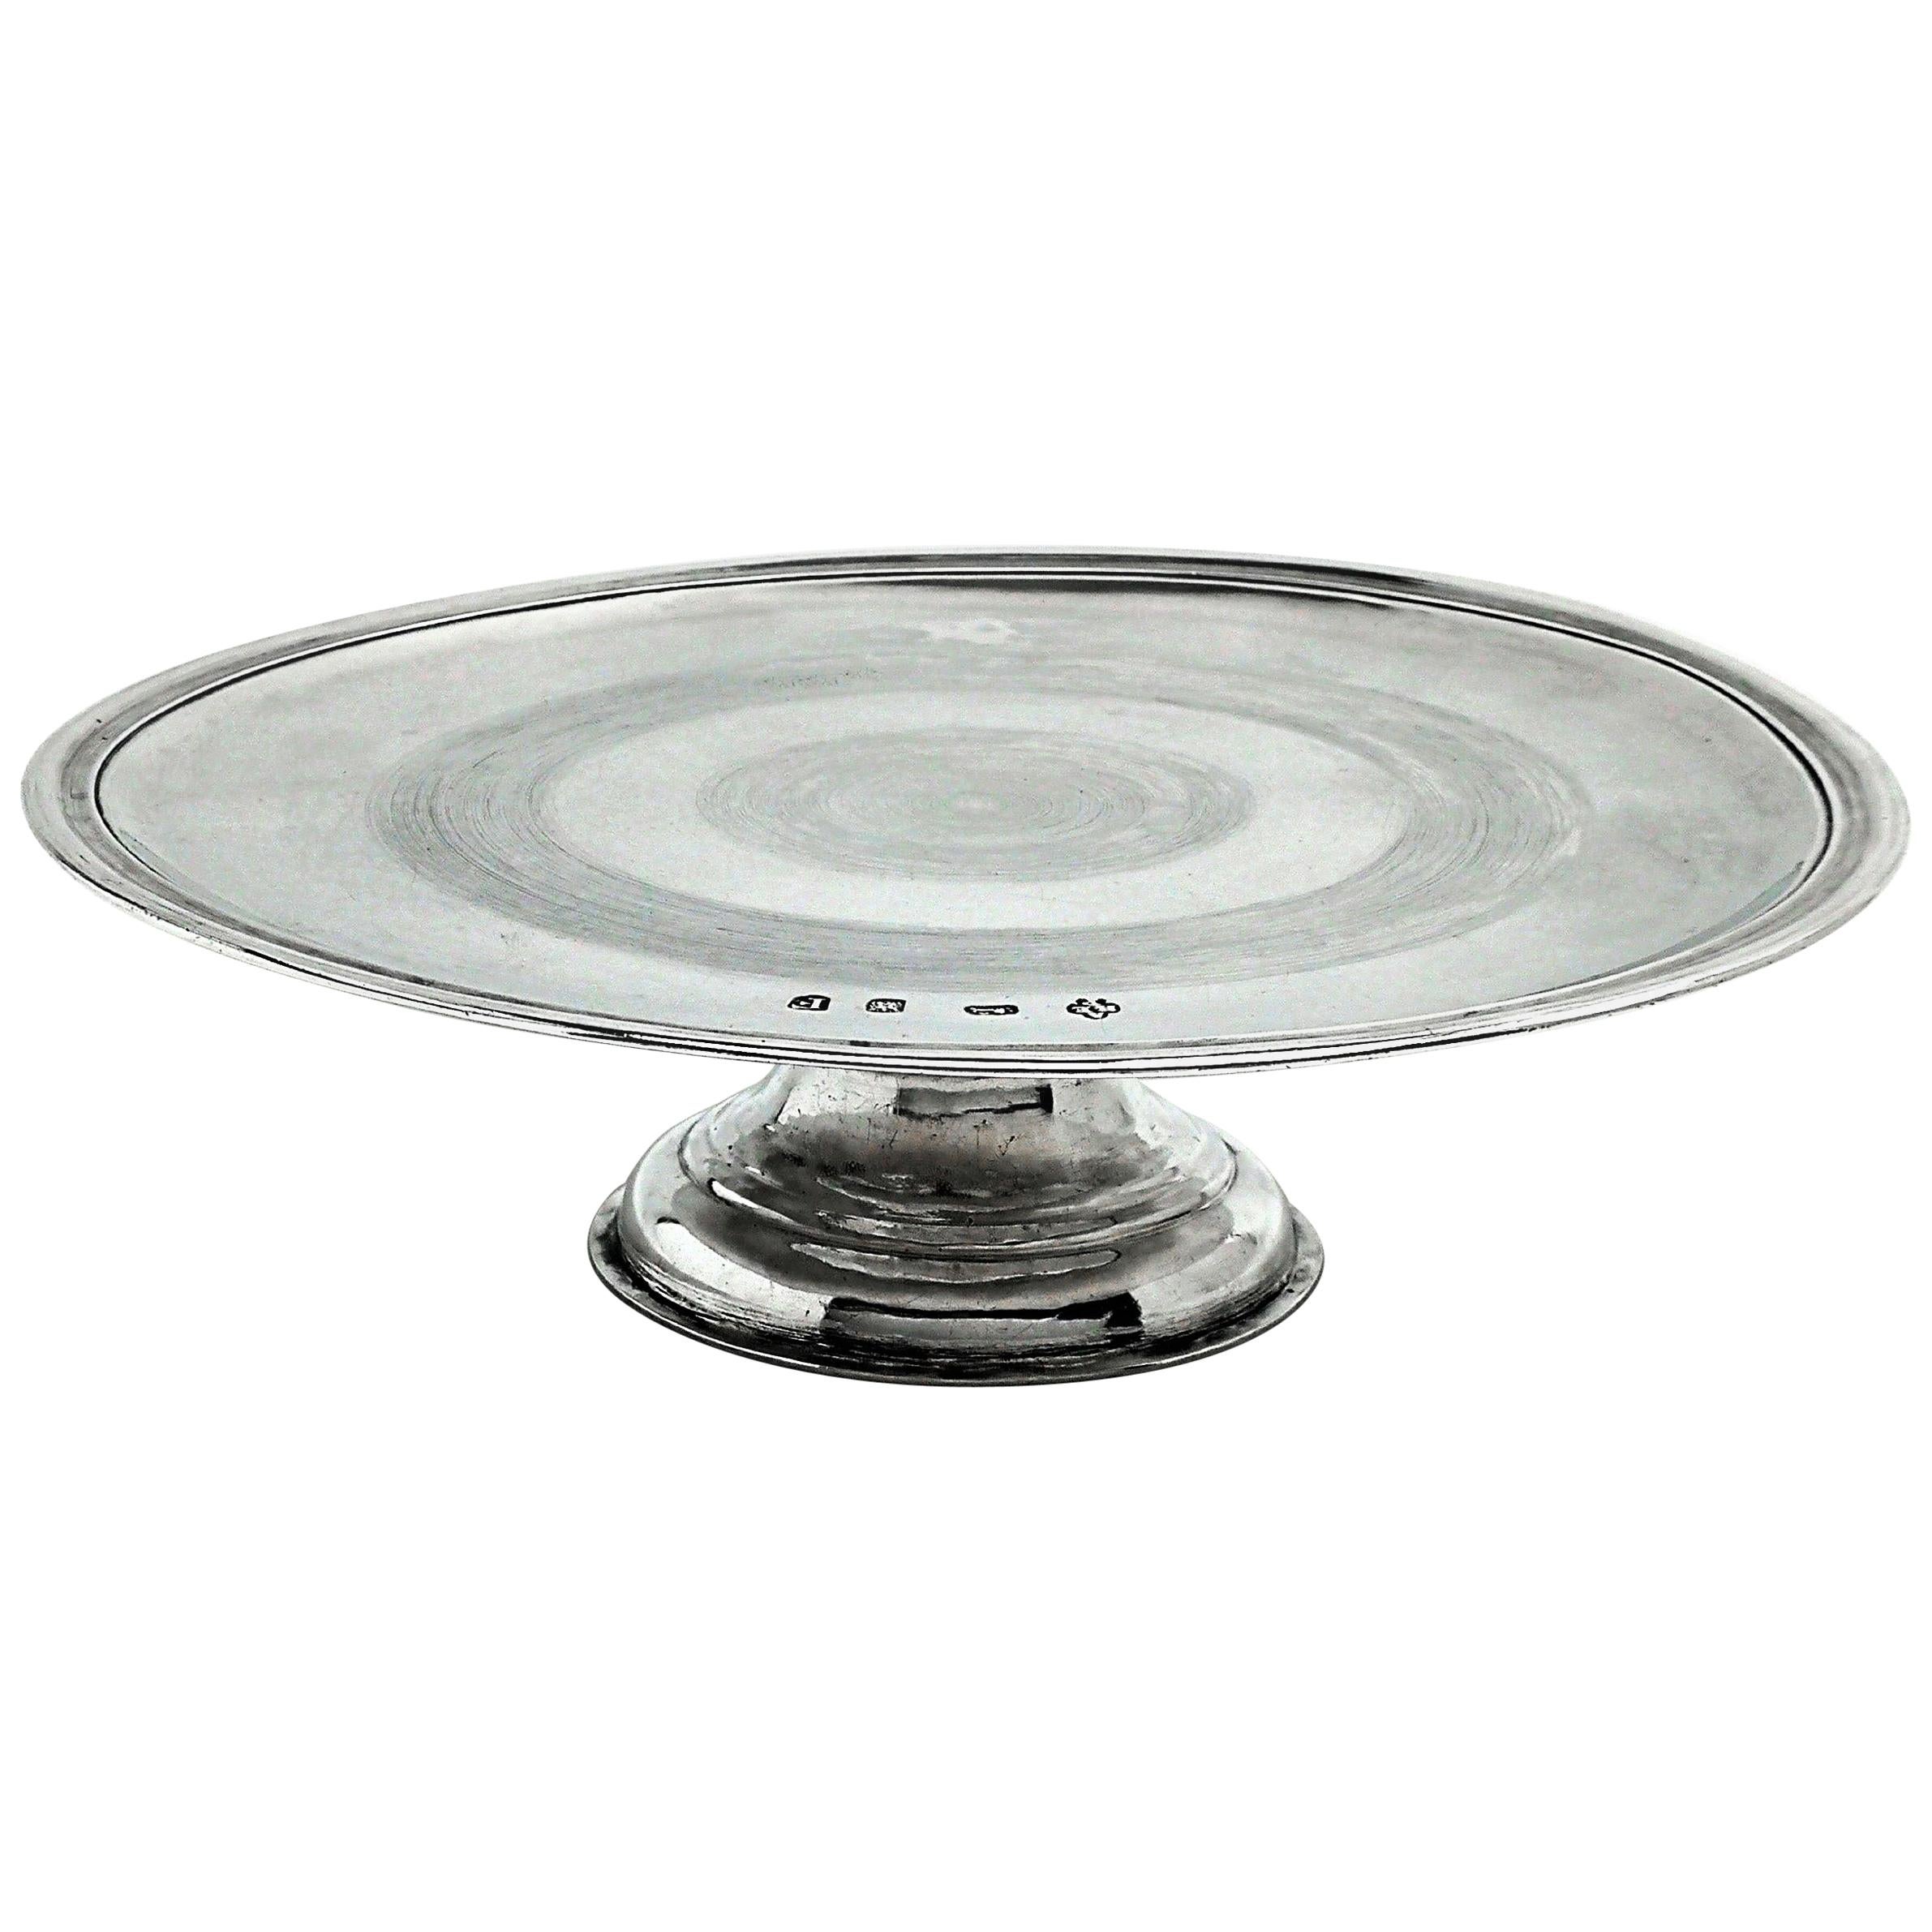 Antique George I Sterling Silver Tazza / Plate 1721 Early Georgian, 18th Century For Sale